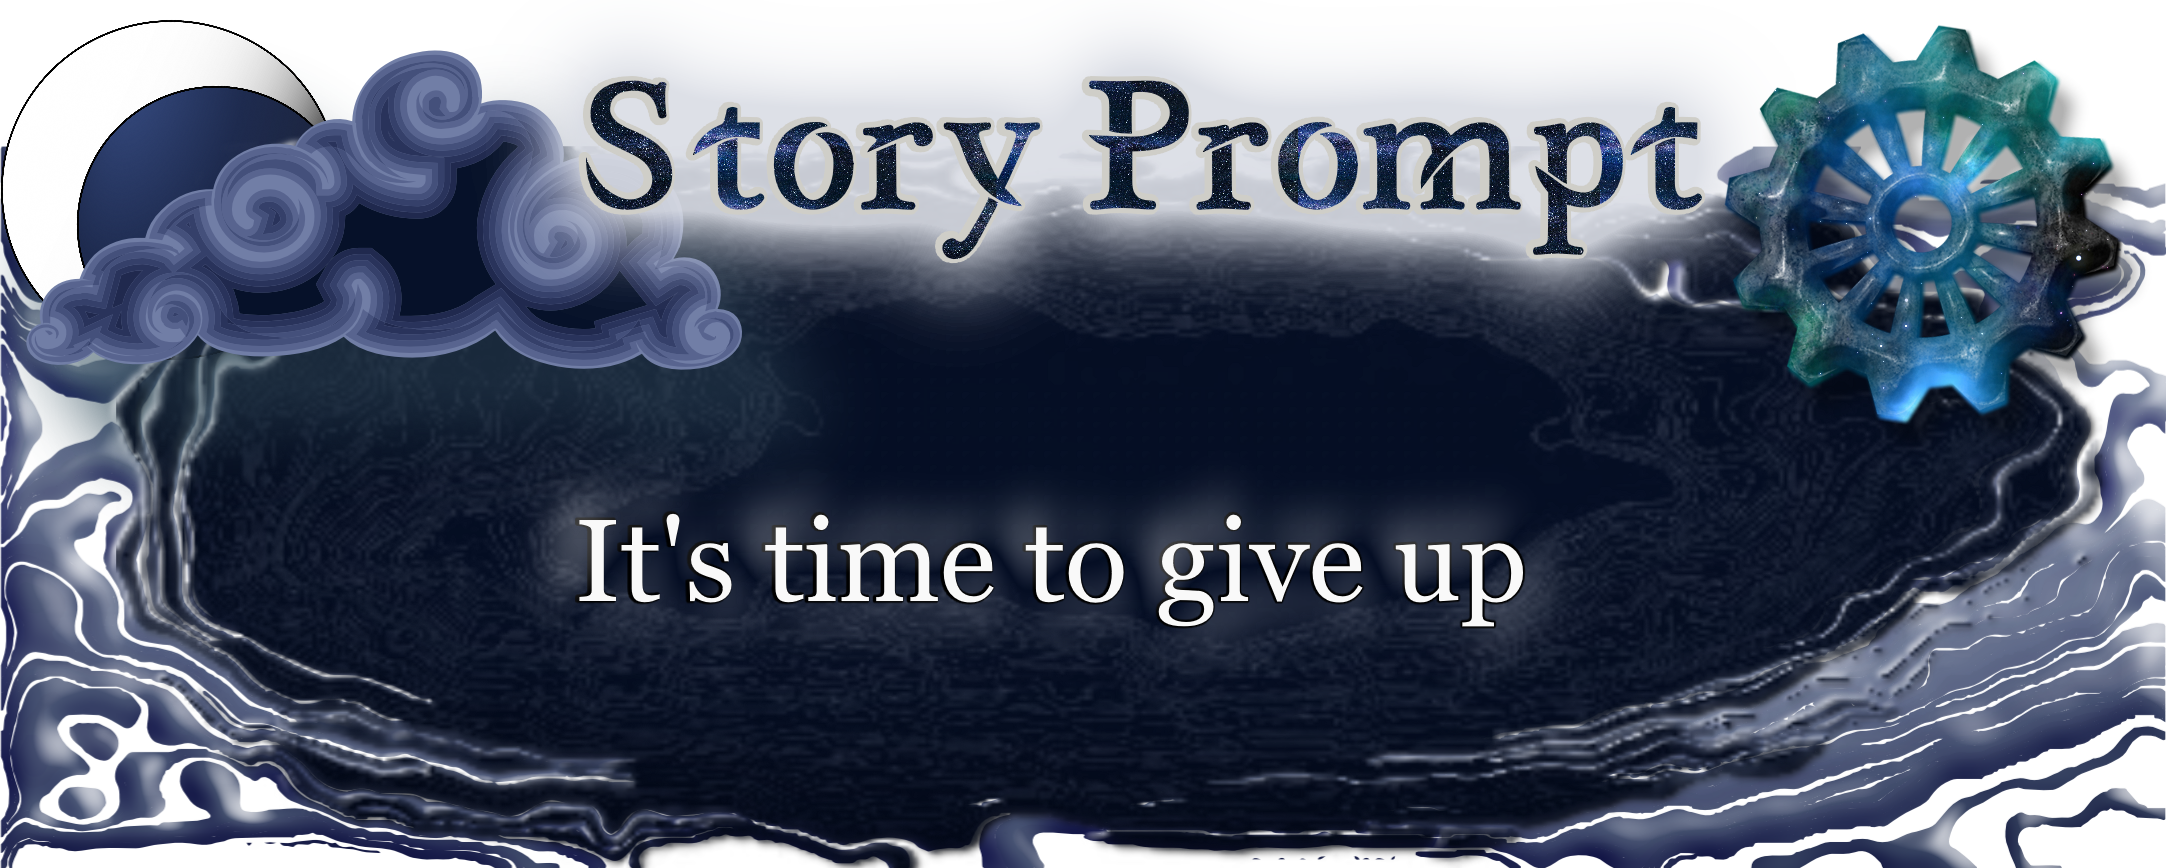 Author Jenna Eatough's Flash Fiction Story from writing prompt: It's time to give up